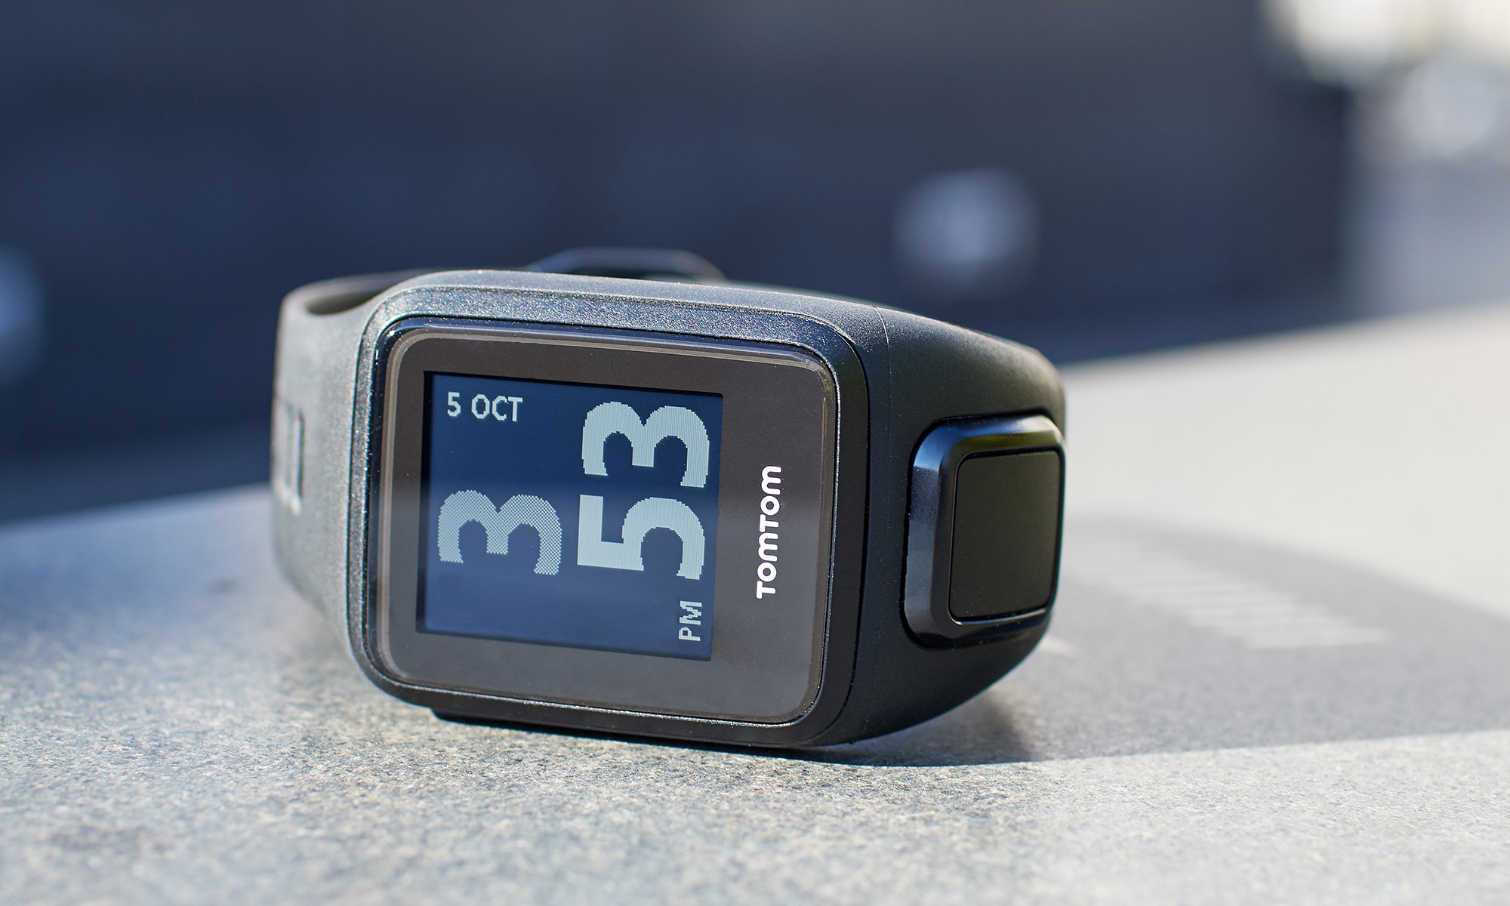 Review: TomTom's Spark (Cardio + Music) fitness tracker brings the tunes